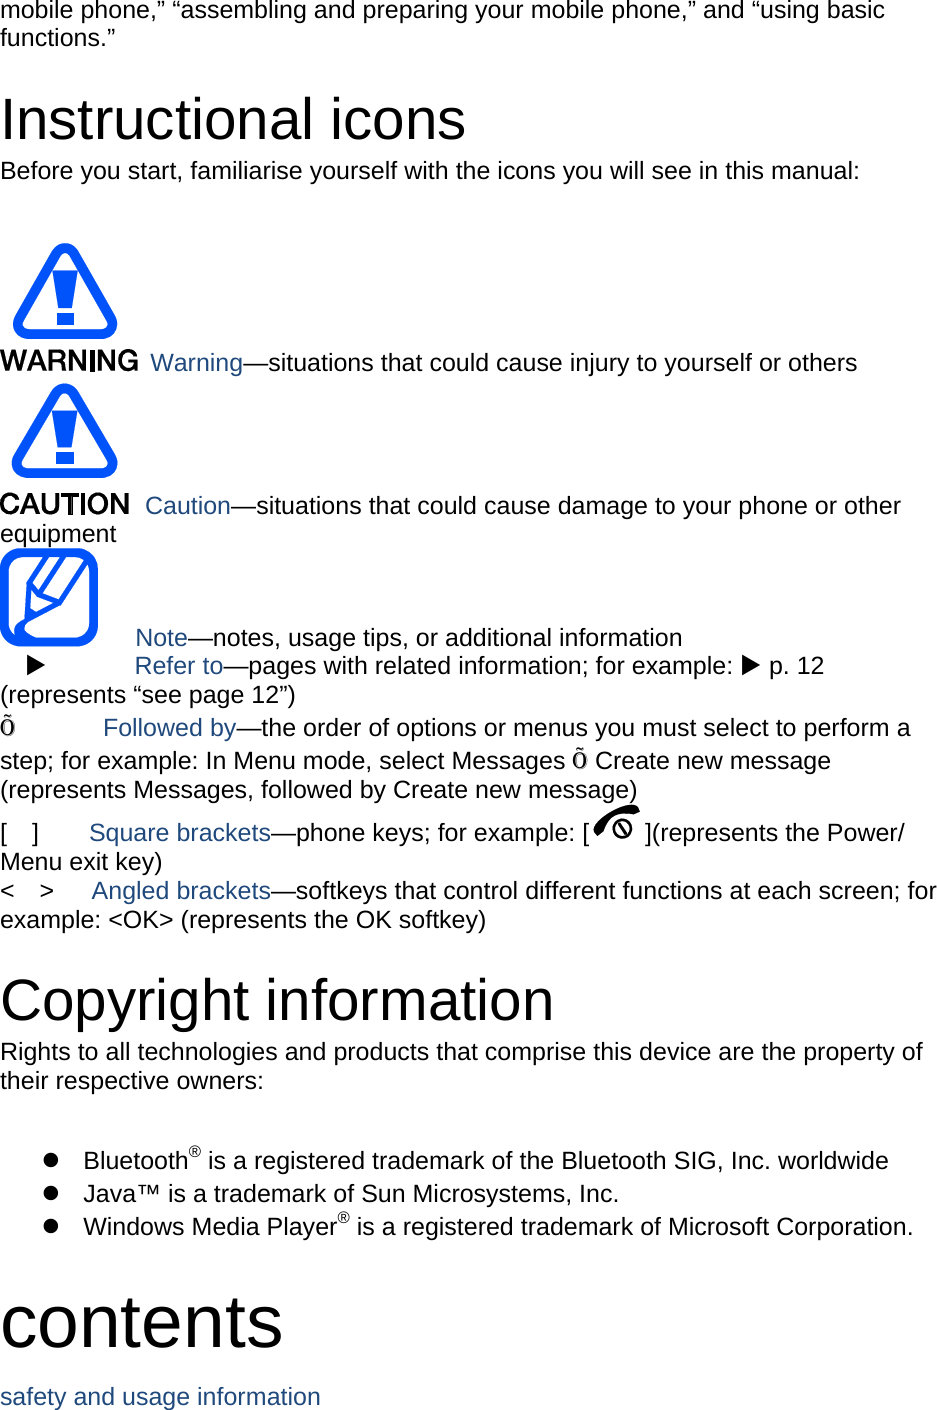 mobile phone,” “assembling and preparing your mobile phone,” and “using basic functions.”  Instructional icons Before you start, familiarise yourself with the icons you will see in this manual:     Warning—situations that could cause injury to yourself or others  Caution—situations that could cause damage to your phone or other equipment    Note—notes, usage tips, or additional information          Refer to—pages with related information; for example:  p. 12 (represents “see page 12”) Õ       Followed by—the order of options or menus you must select to perform a step; for example: In Menu mode, select Messages Õ Create new message (represents Messages, followed by Create new message) [  ]    Square brackets—phone keys; for example: [ ](represents the Power/ Menu exit key) &lt;  &gt;   Angled brackets—softkeys that control different functions at each screen; for example: &lt;OK&gt; (represents the OK softkey)  Copyright information Rights to all technologies and products that comprise this device are the property of their respective owners:   Bluetooth® is a registered trademark of the Bluetooth SIG, Inc. worldwide   Java™ is a trademark of Sun Microsystems, Inc.  Windows Media Player® is a registered trademark of Microsoft Corporation.  contents safety and usage information     